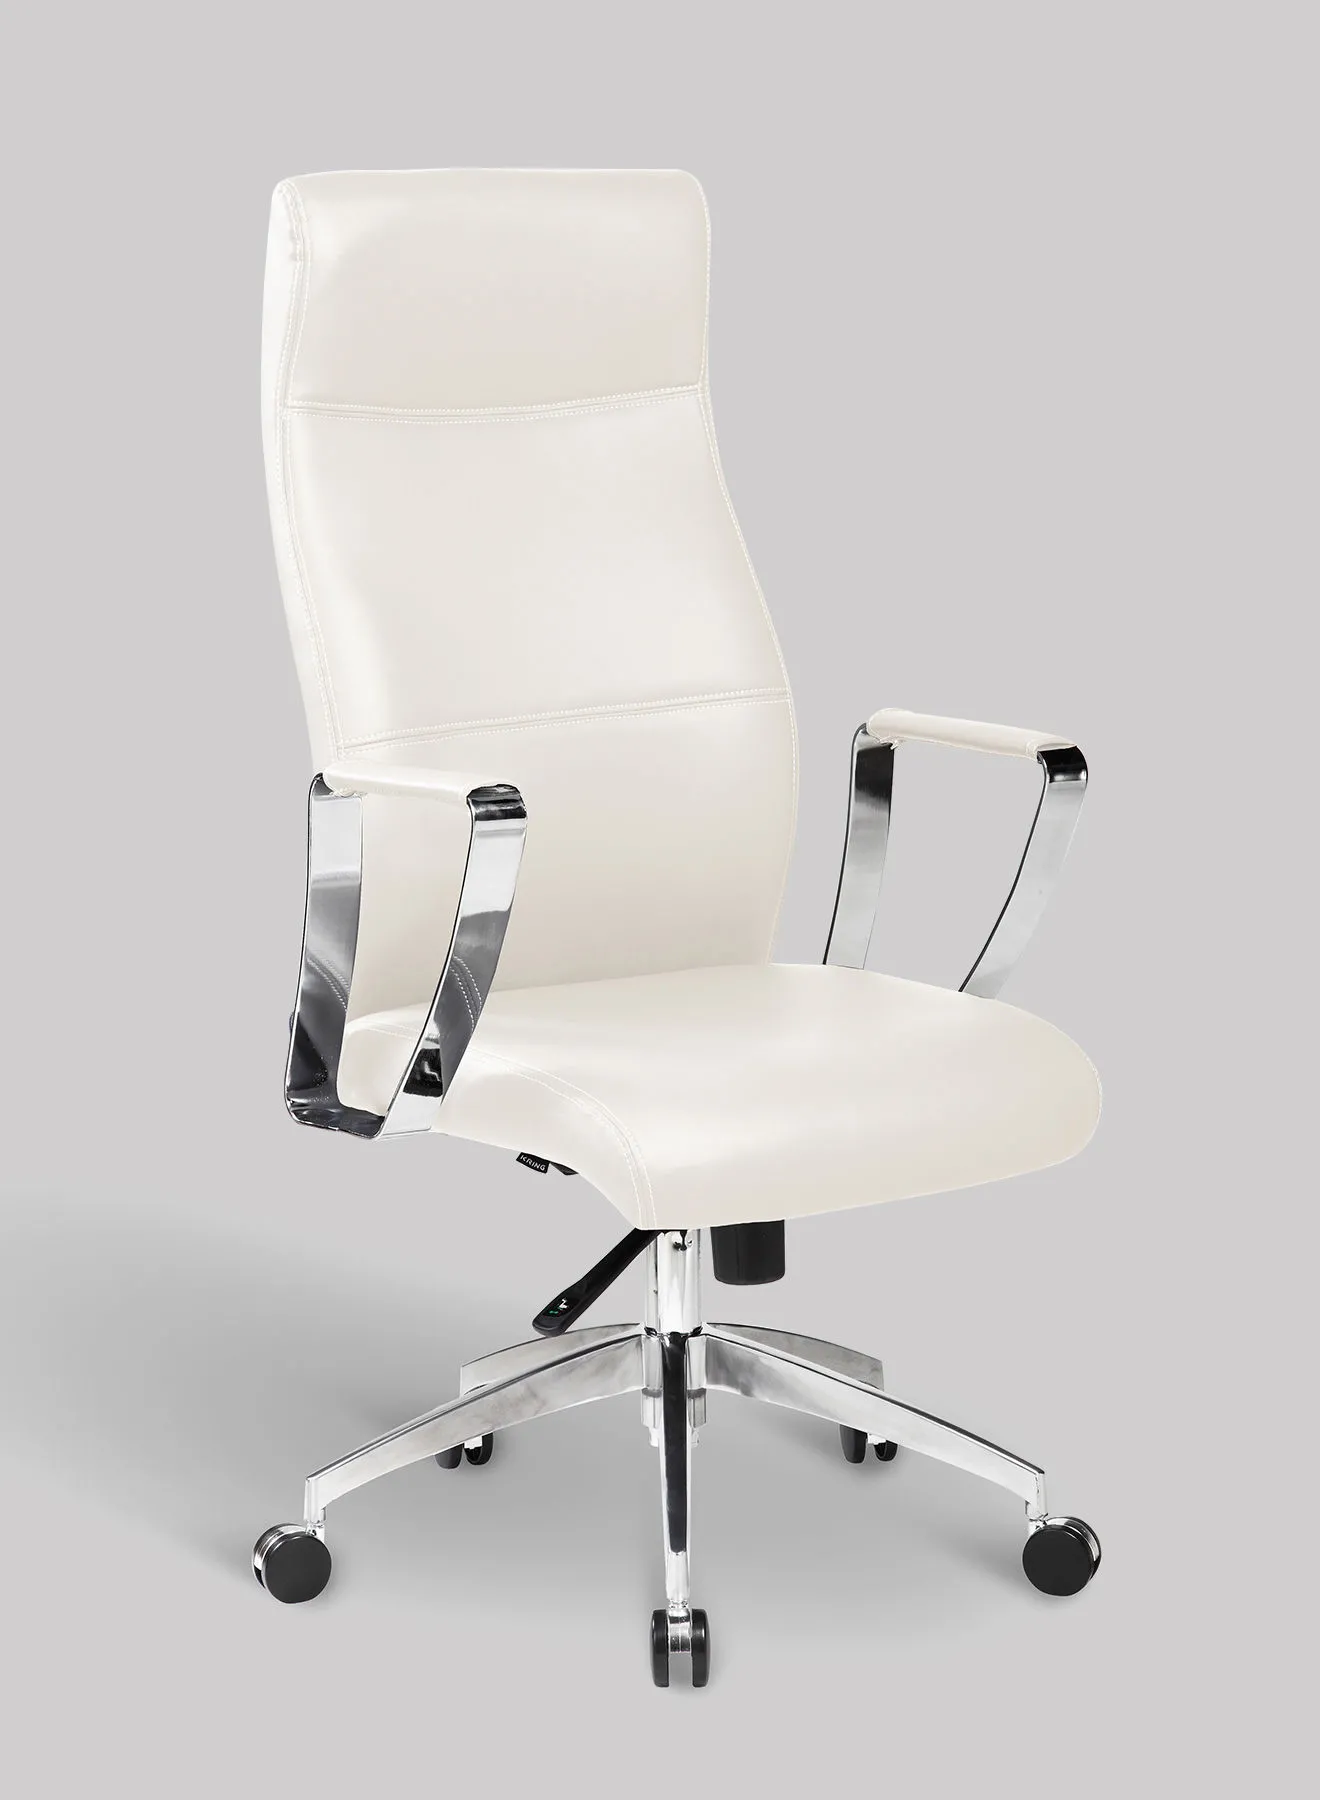 ebb & flow Office Chair Luxurious - In Cream/White Pu Backrest And Stainless Steel Swivel Wheel Chair - Size 88 X 32.5 X 62 For Your Perfect As Home Office Chair